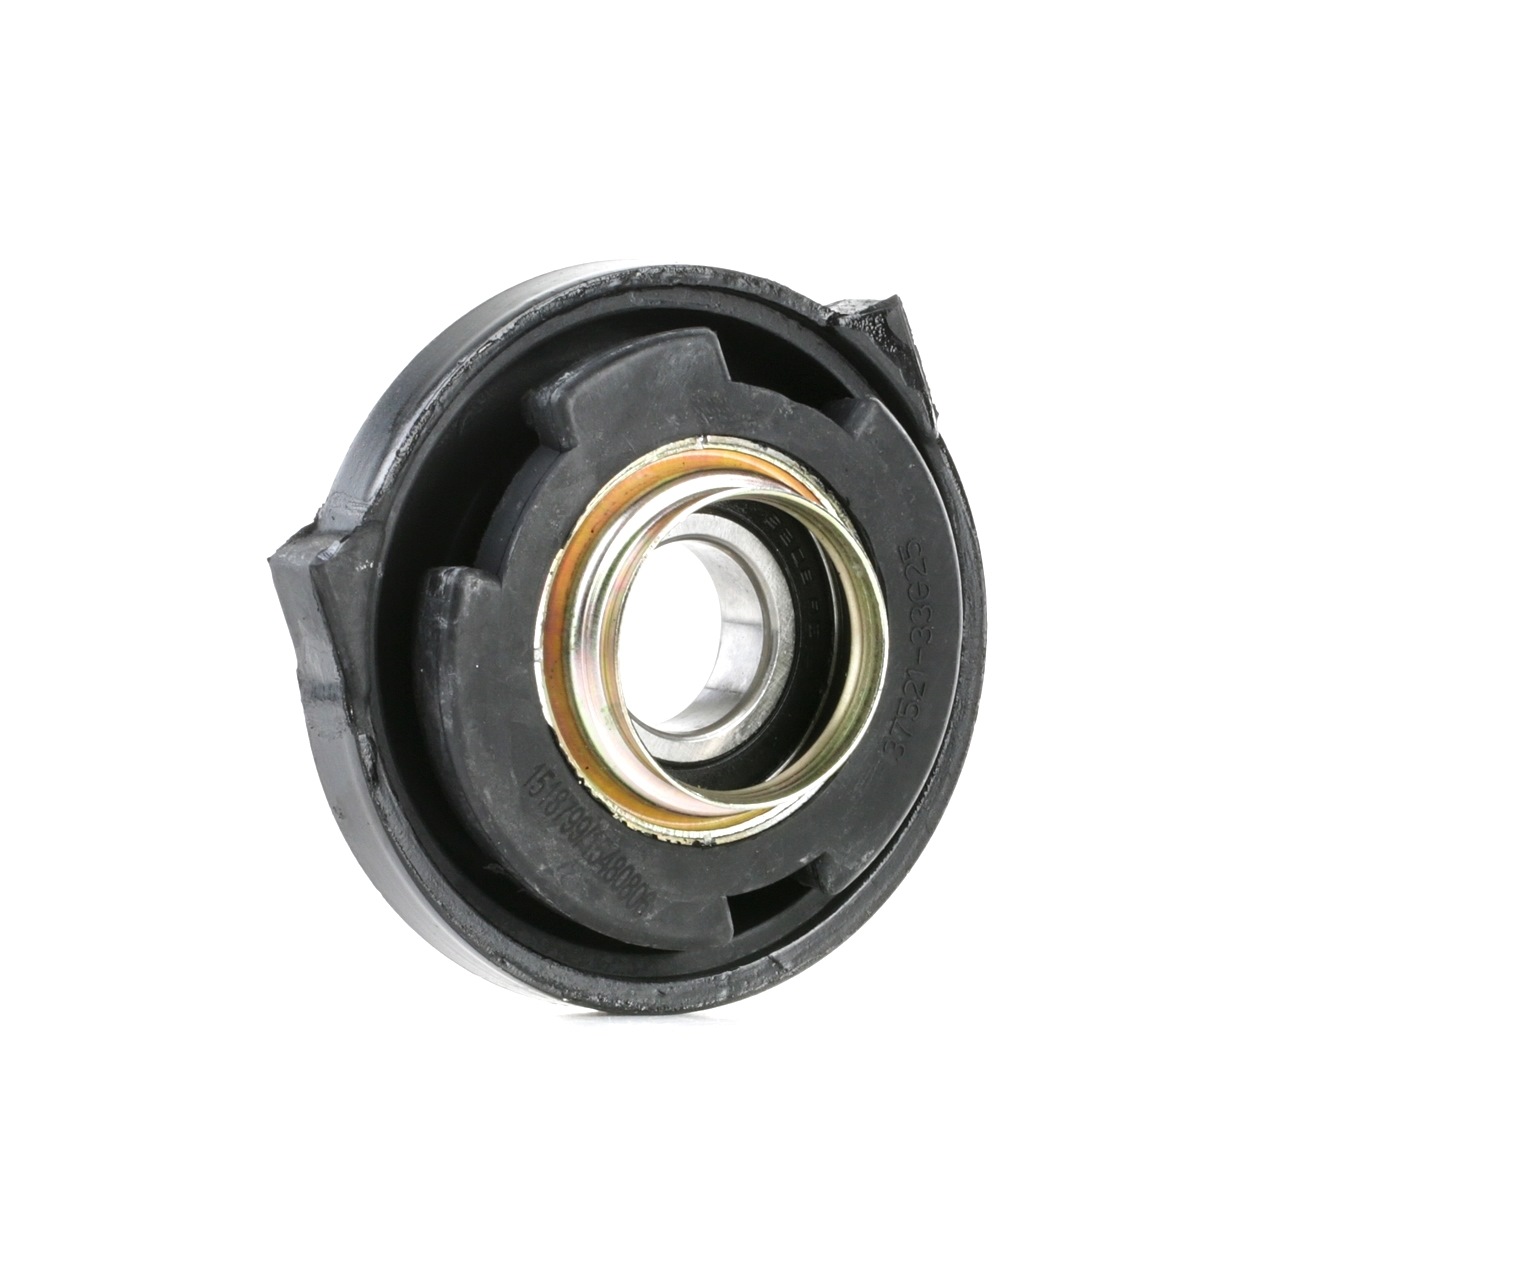 RIDEX 1420M0021 Propshaft bearing Rear propshaft at transfer case, with rolling bearing